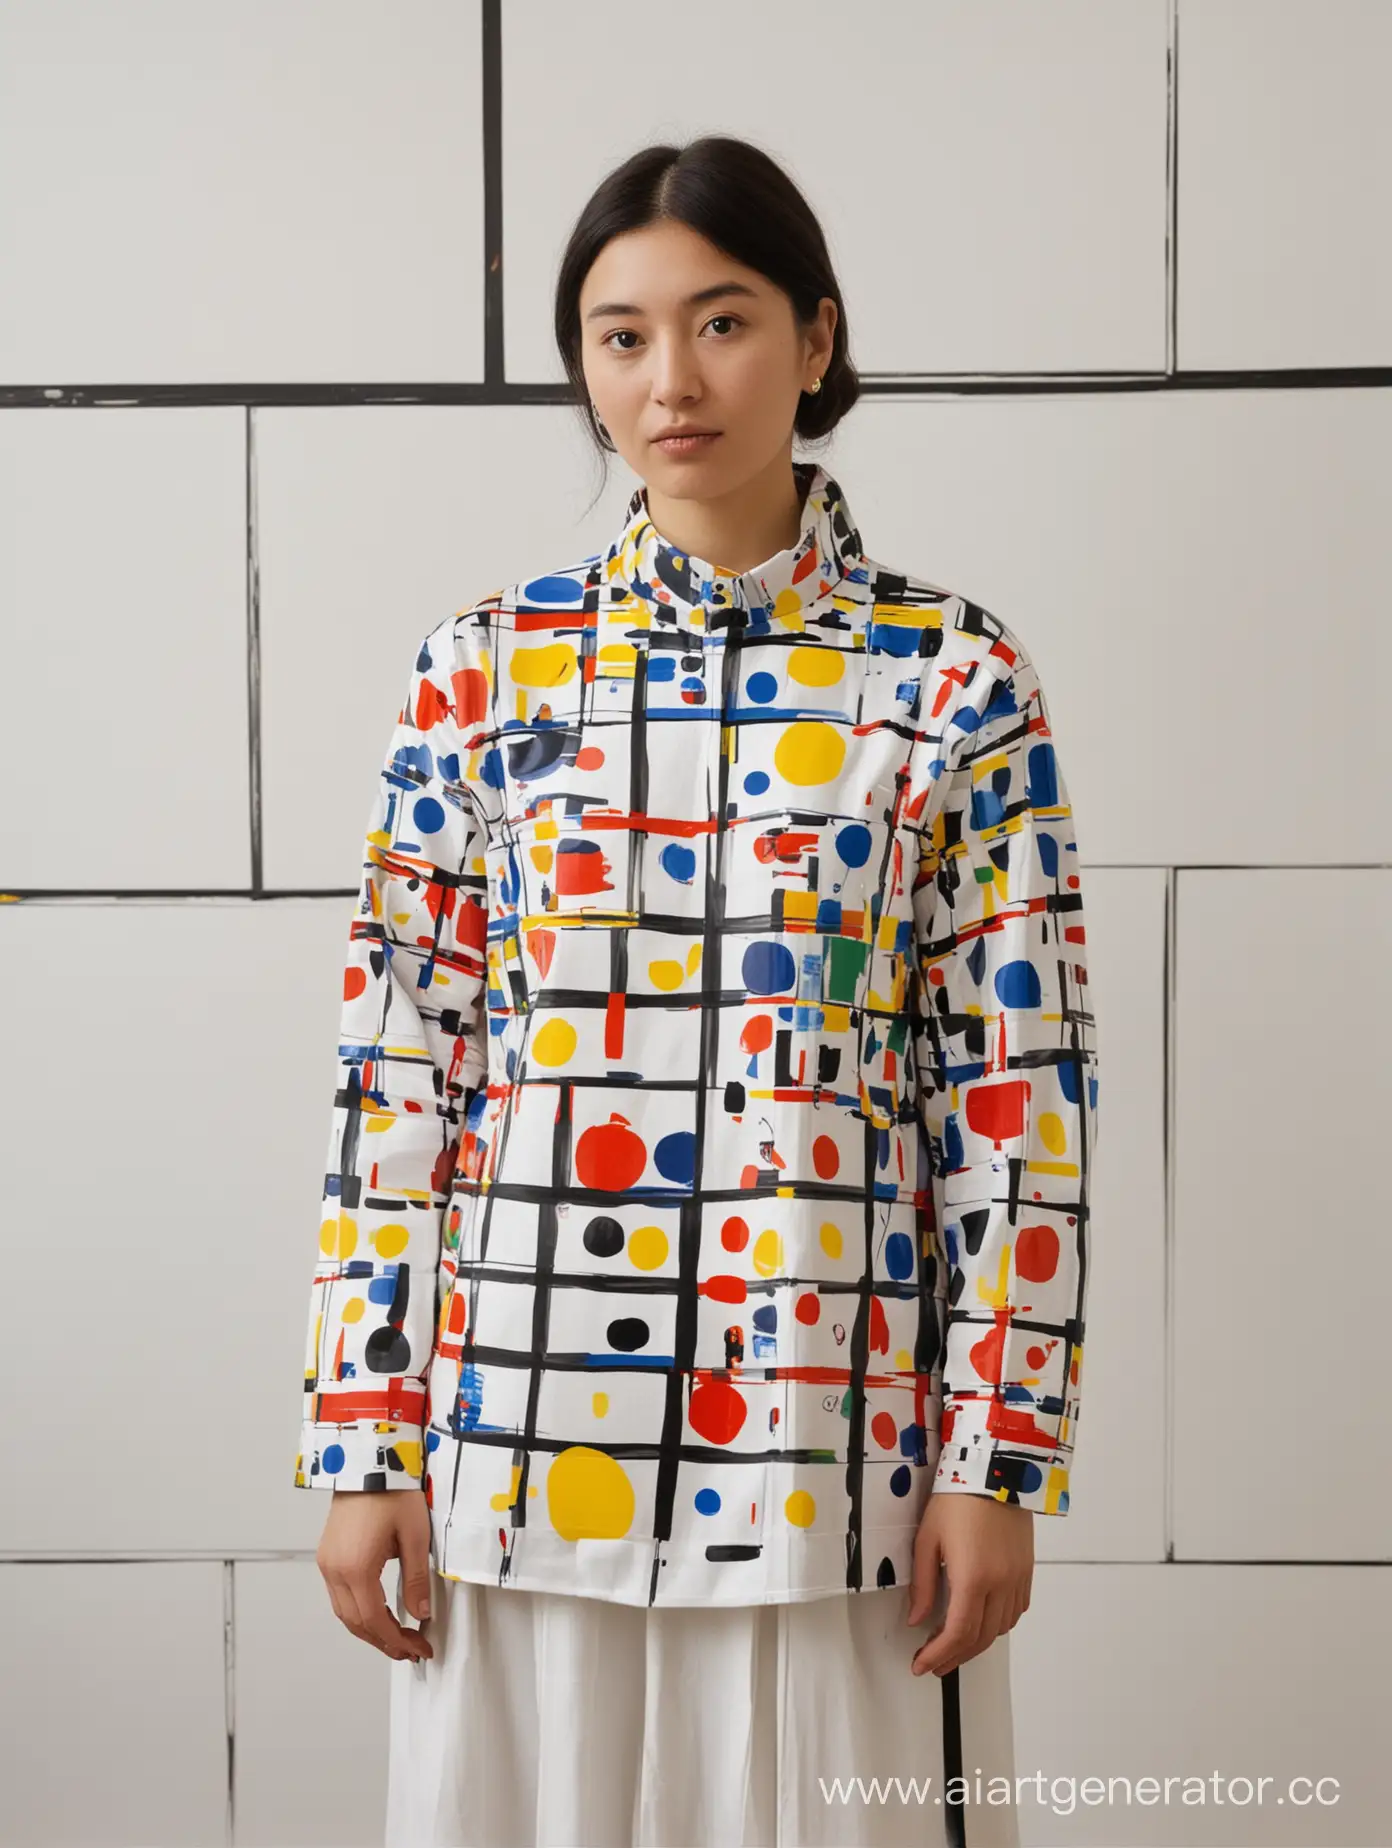 create a painting based on the work of artists Piet Mondrian and Yayoi Kusama. 